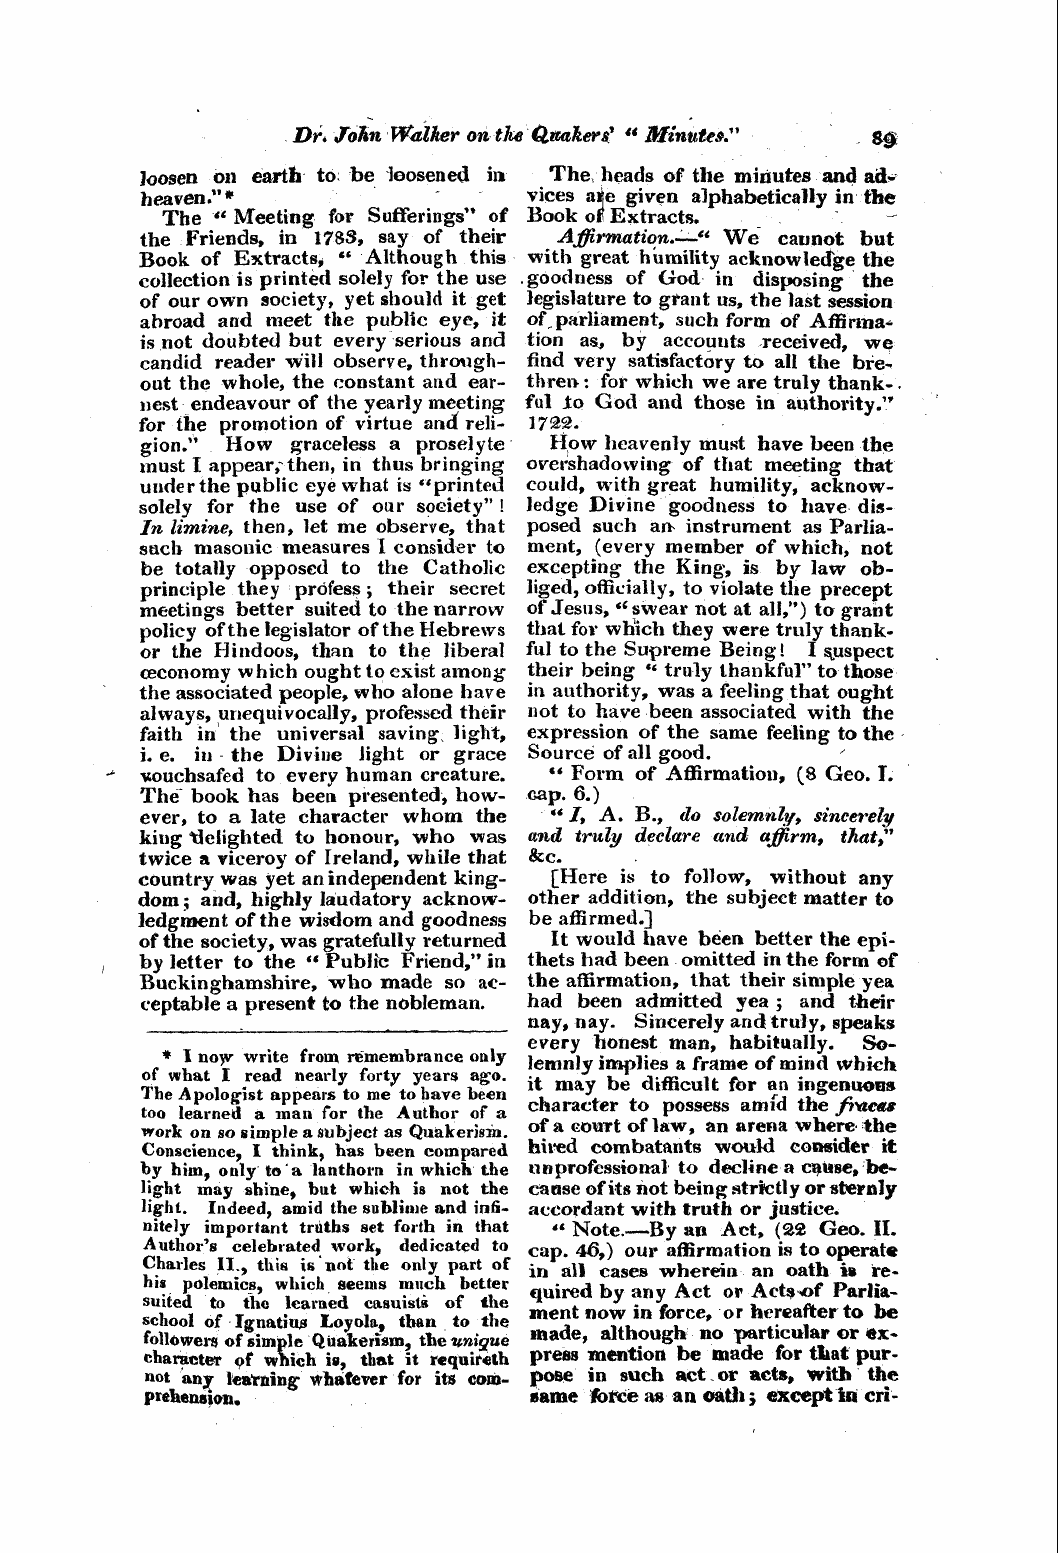 Monthly Repository (1806-1838) and Unitarian Chronicle (1832-1833): F Y, 1st edition, Supplement: 21